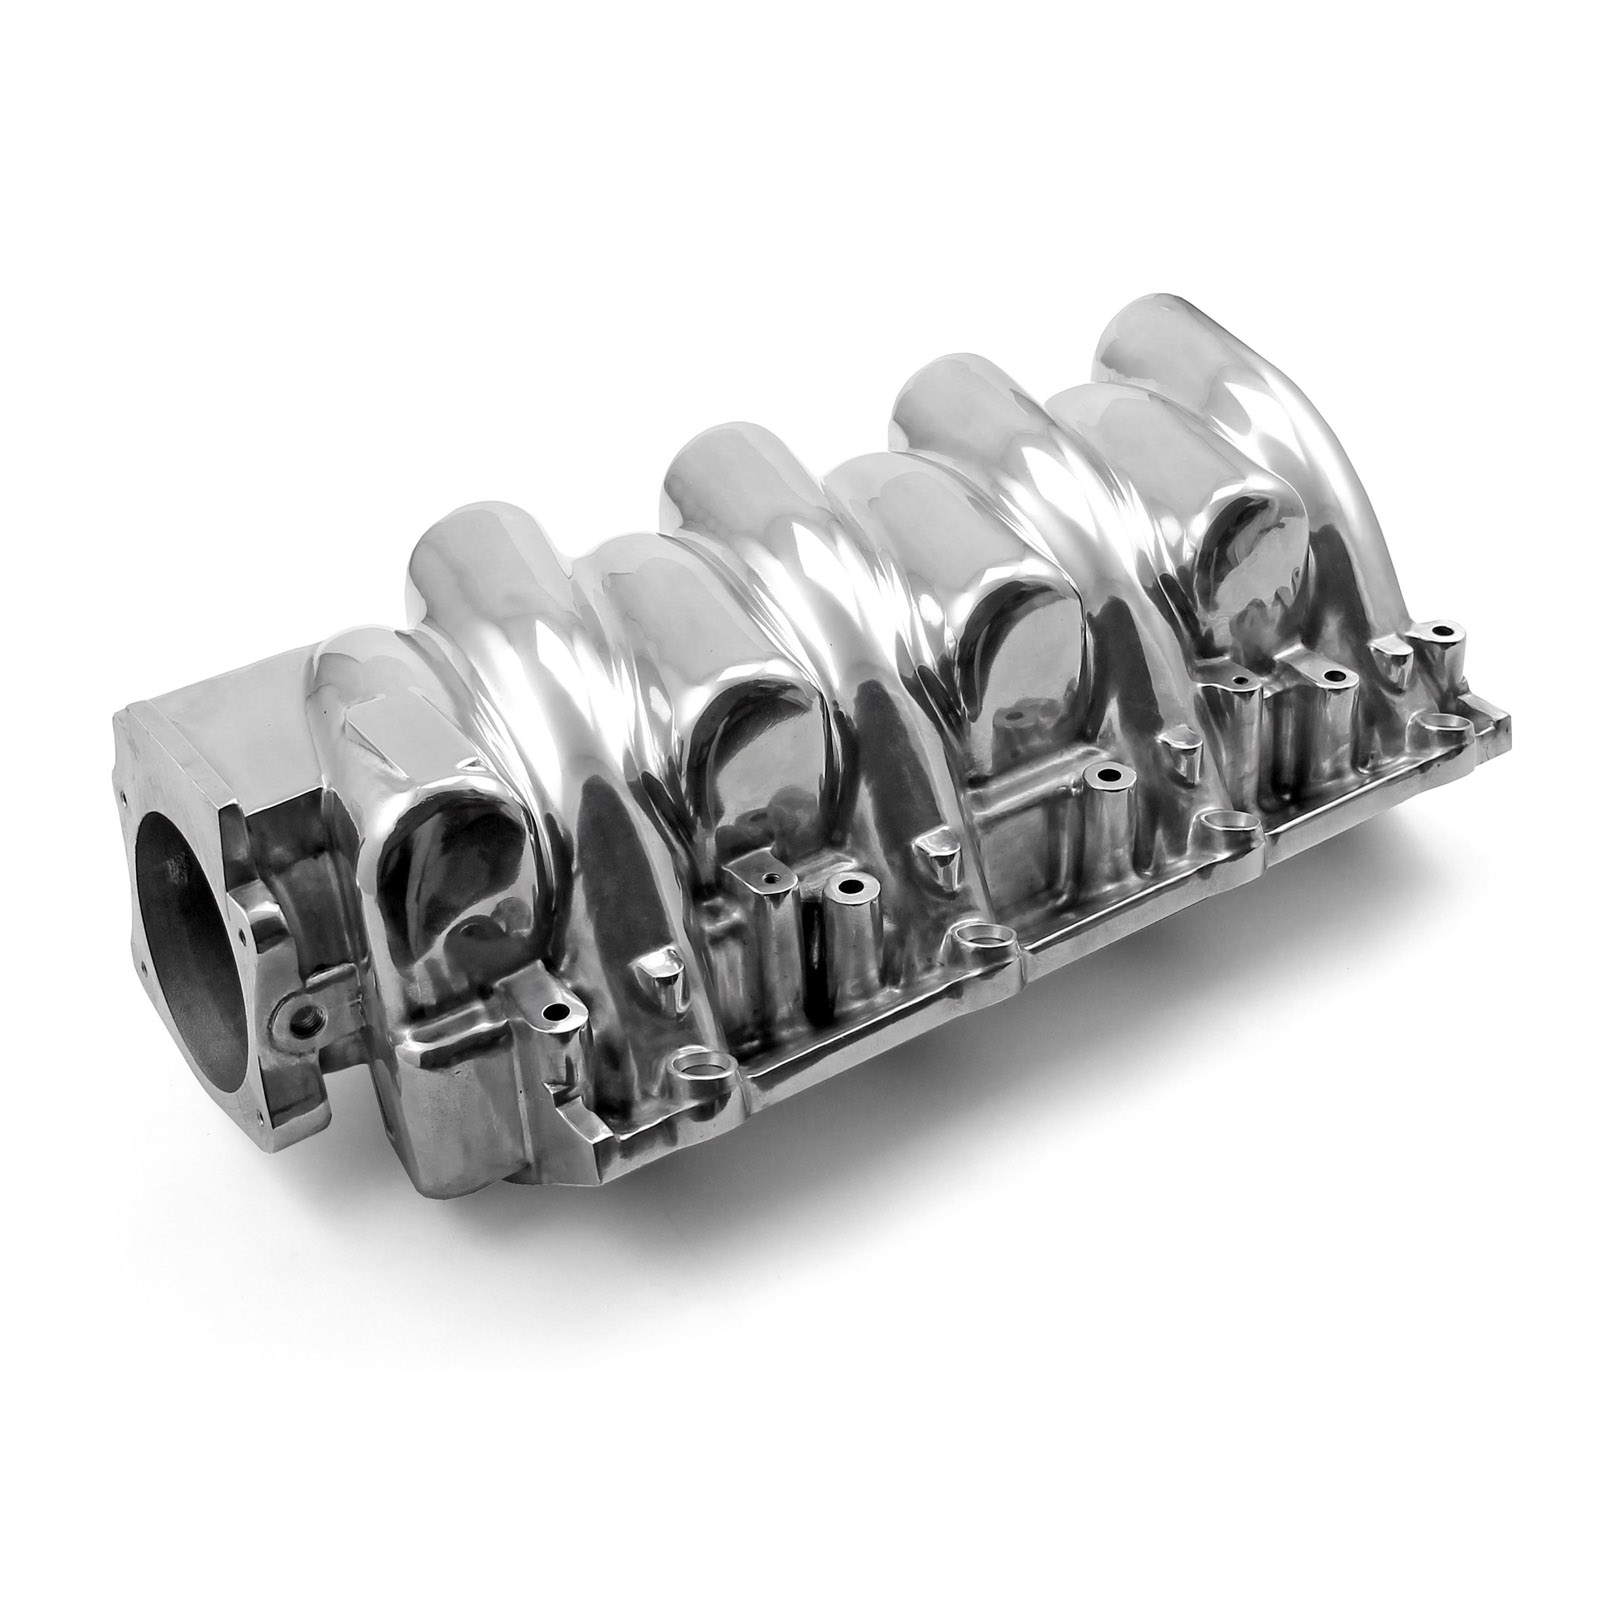 Speedmaster Chevy LS2 EFI 96mm Qualifier Aluminum Intake Manifold Polished for Corvette,GTO and Others